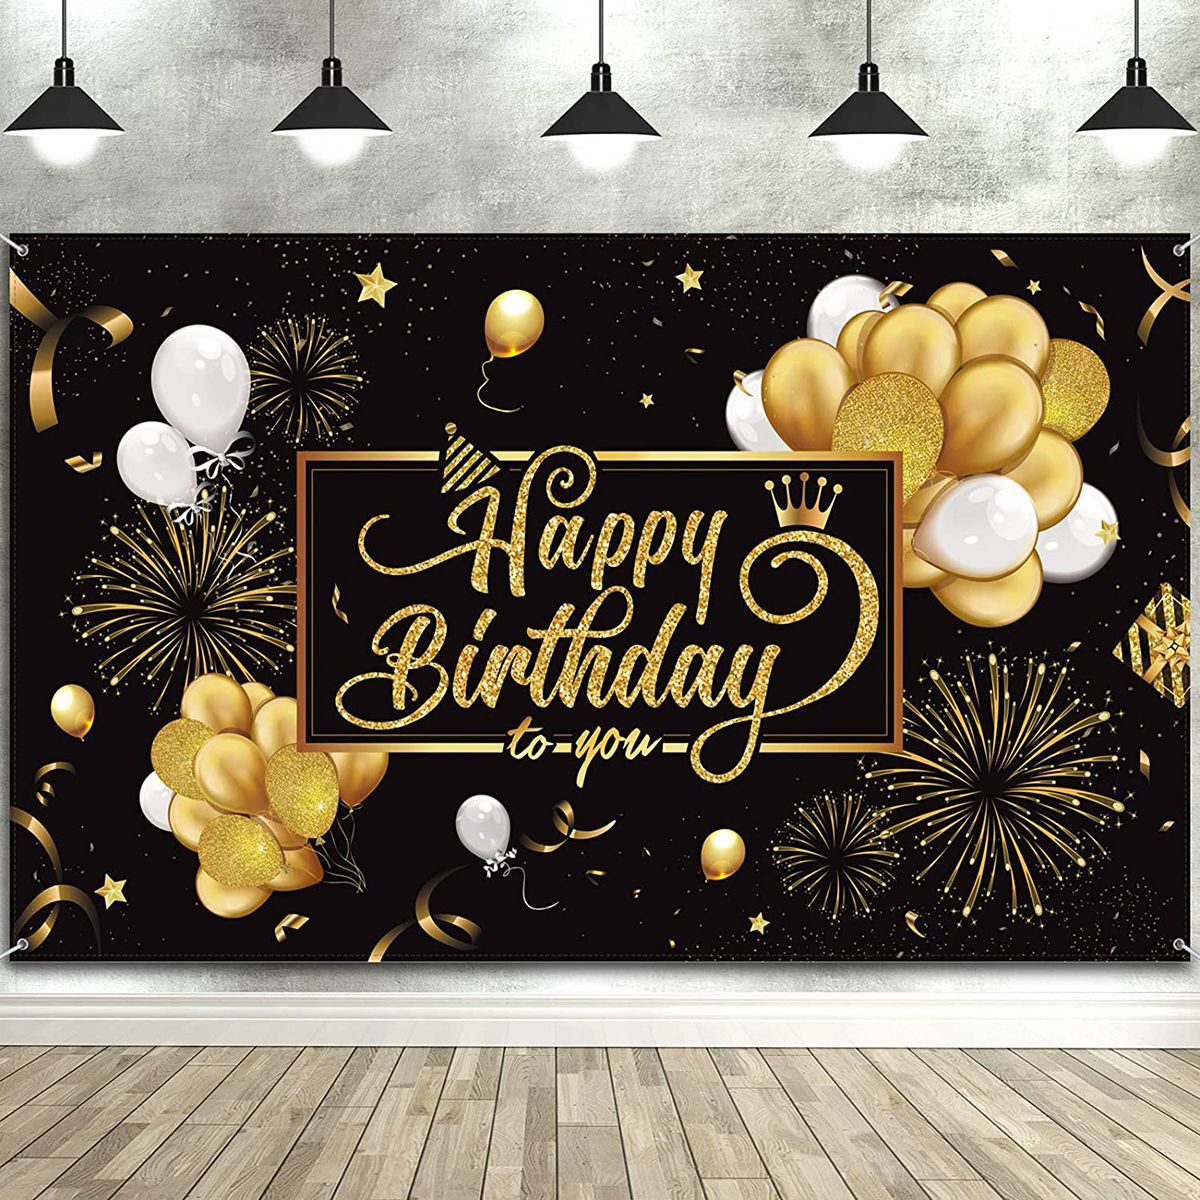 Black-Gold-Balloon-Birthday-Backdrop-Party-Photography-Background-Banner-Decor-1834299